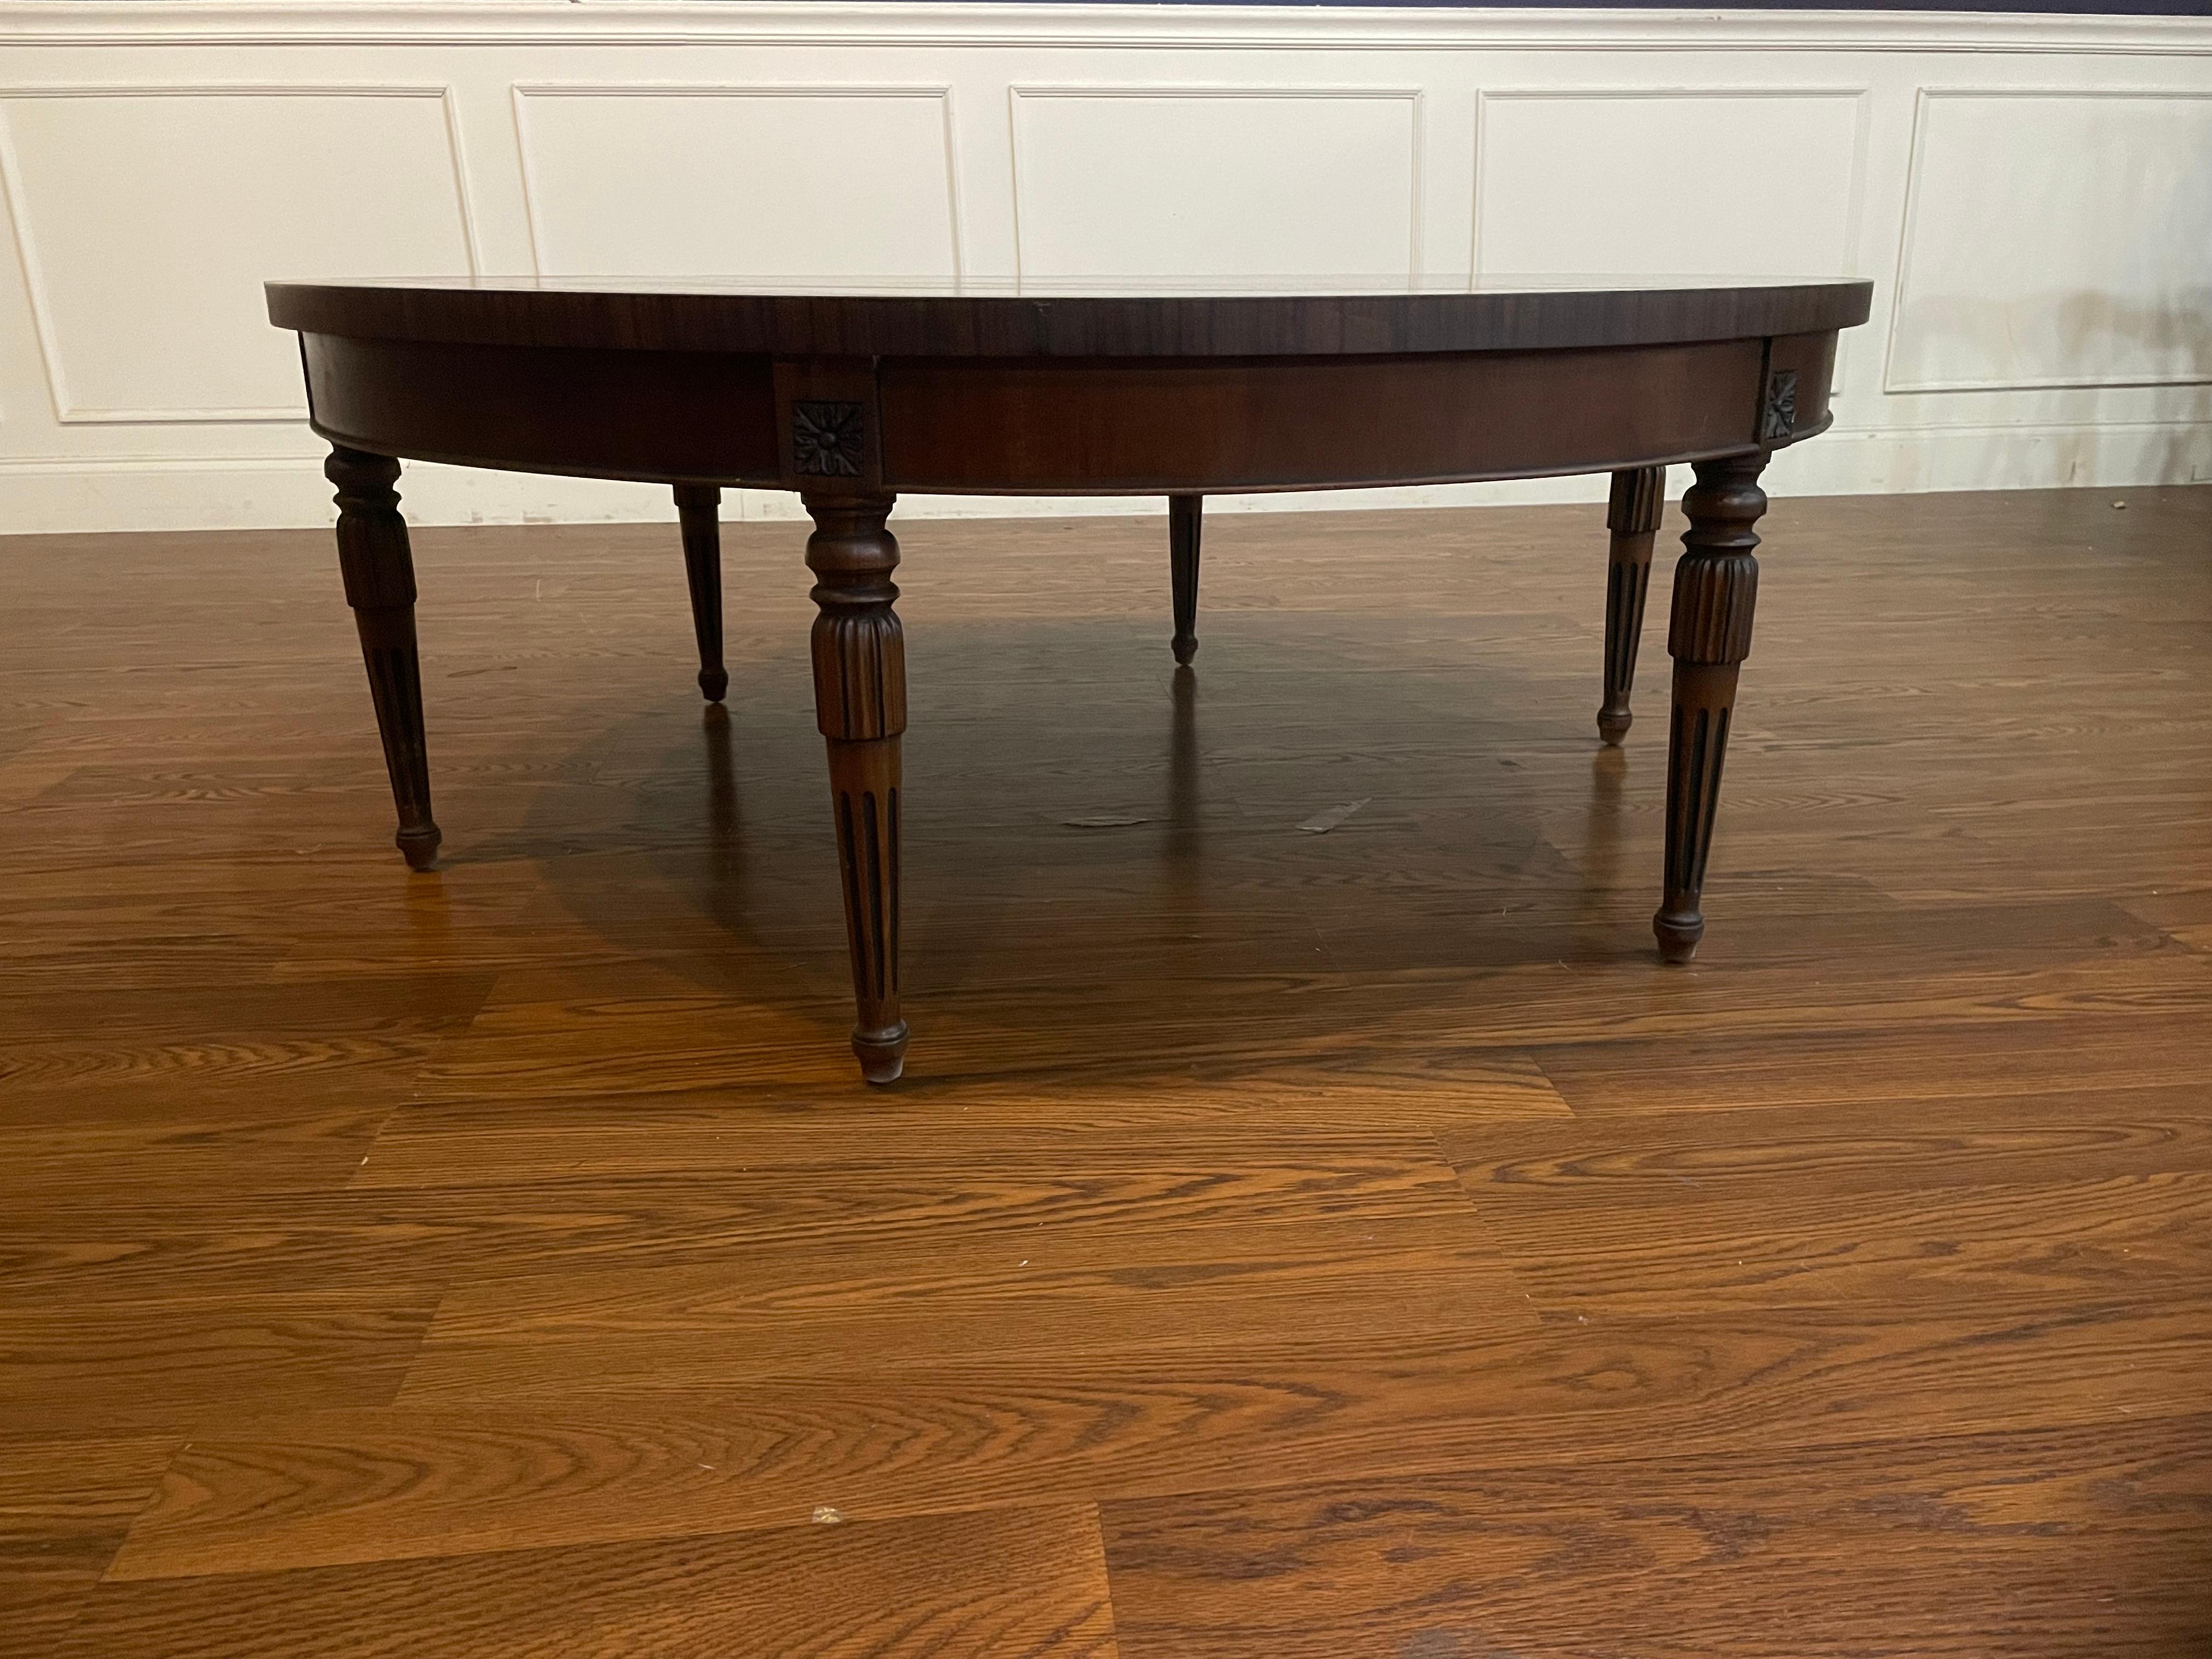 This is a made-to-order round traditional mahogany coffee table made in the Leighton Hall shop. It features swirly crotch mahogany and borders of straight grain mahogany and santos rosewood (Pau Ferro). It has six Sheraton inspired round fluted